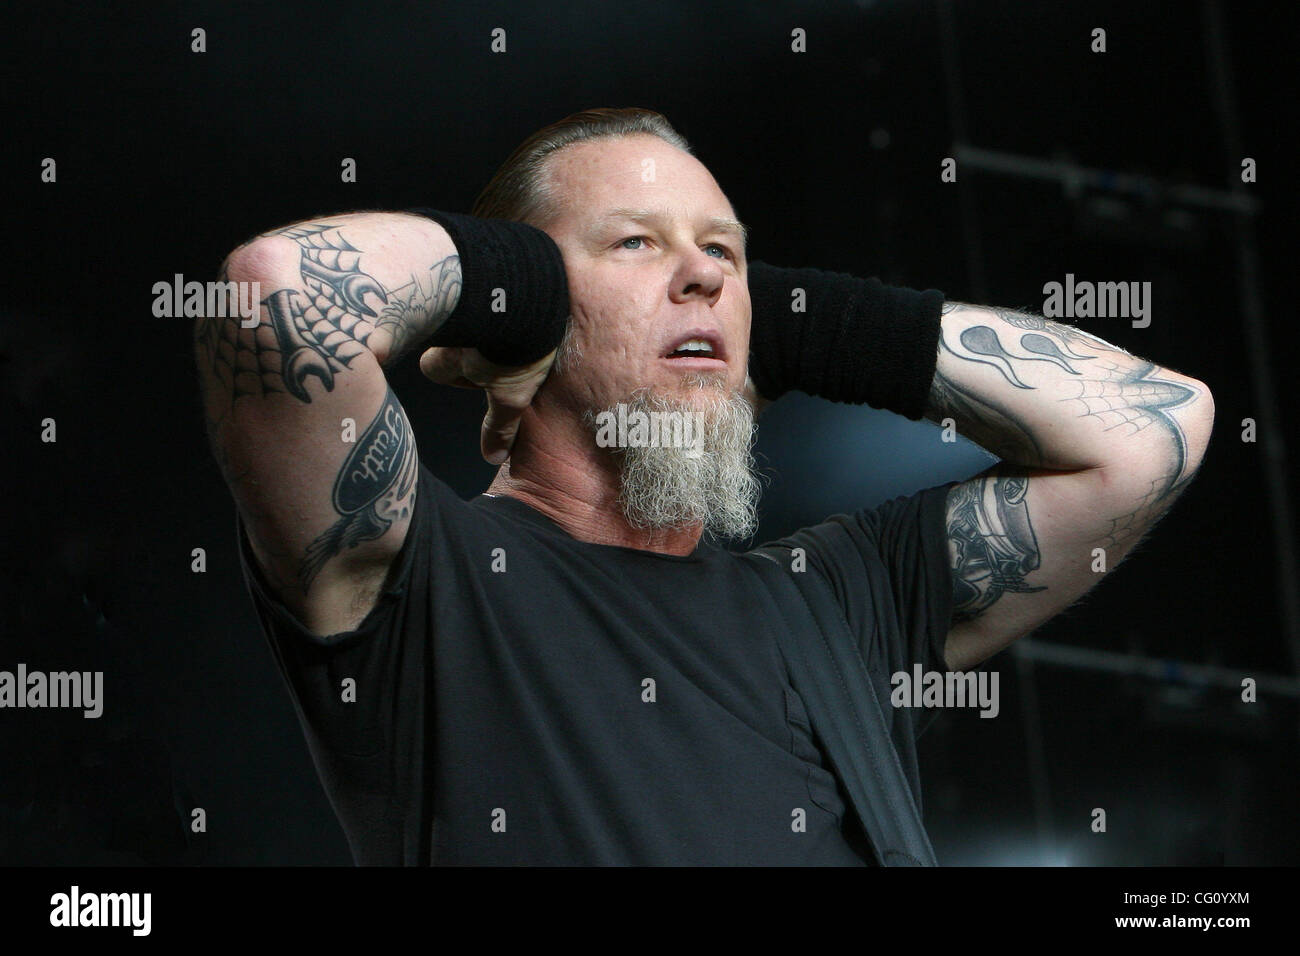 The leader of Metallica rock group James Hetfield in the concert in Moscow. July 18, 2007 Stock Photo